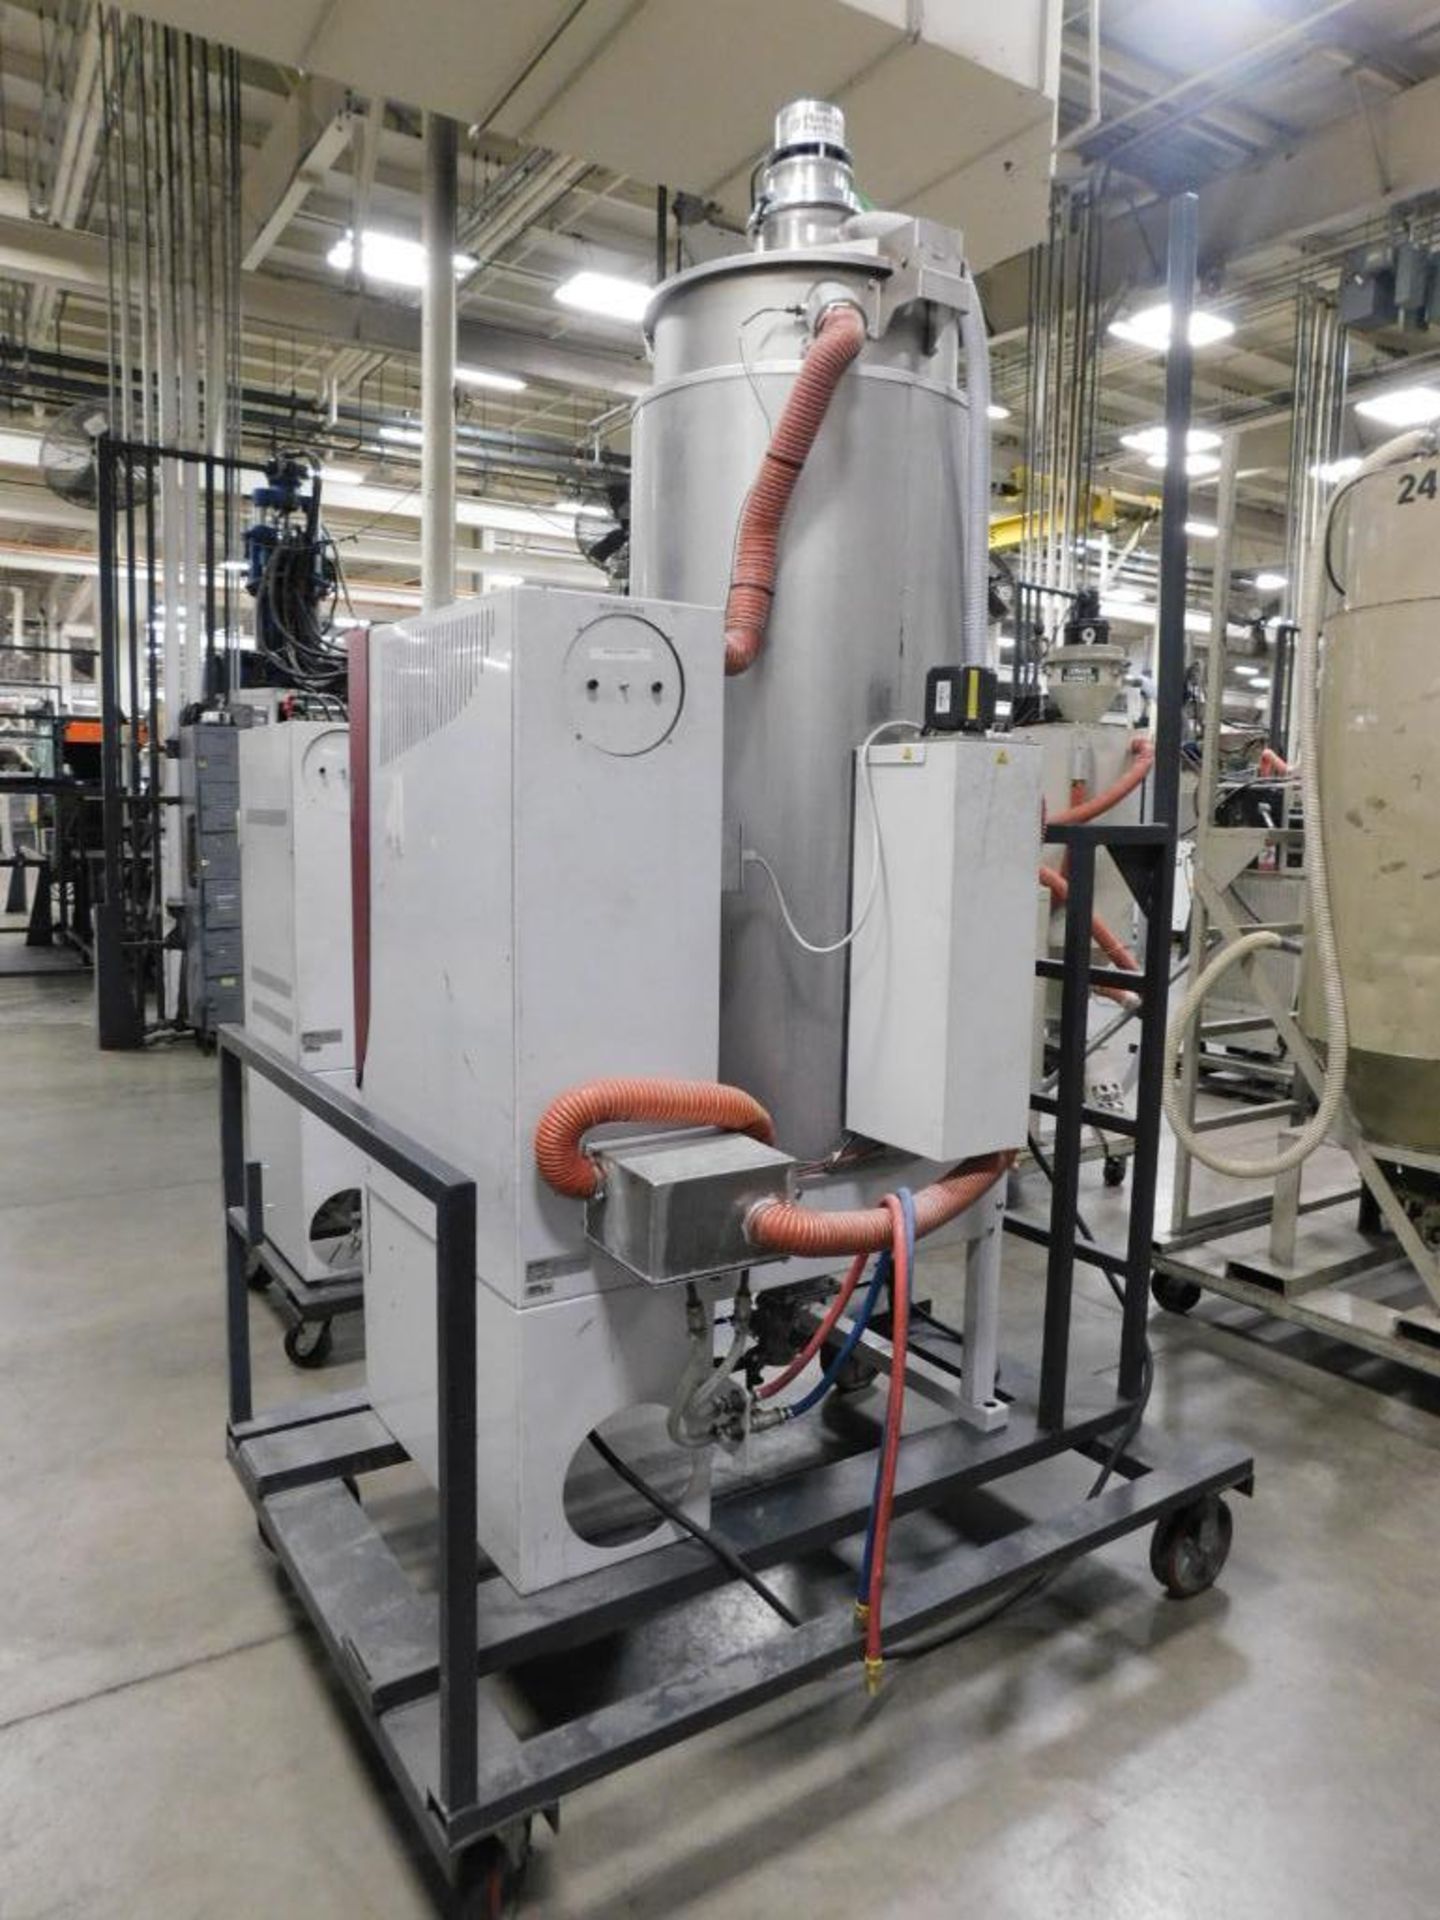 Wittmann Desiccant Material Dryer Unit, 565 Lb. Capacity Top Side Vacuum Loaded Gravity Bottom Disch - Image 6 of 8